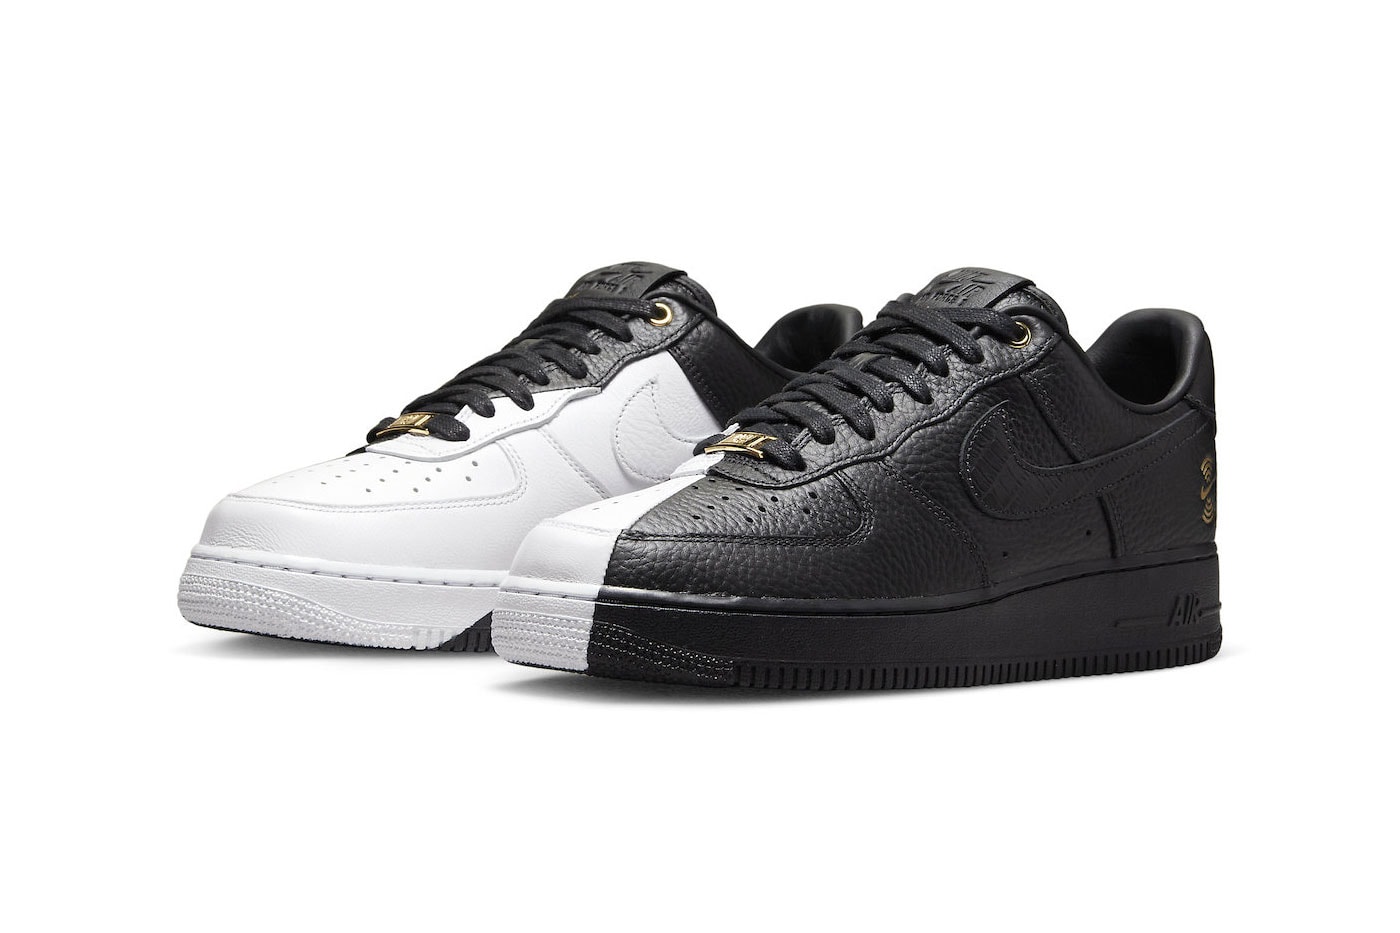 Nike Air Force 1 Low Anniversary Edition Surfaces in a Split